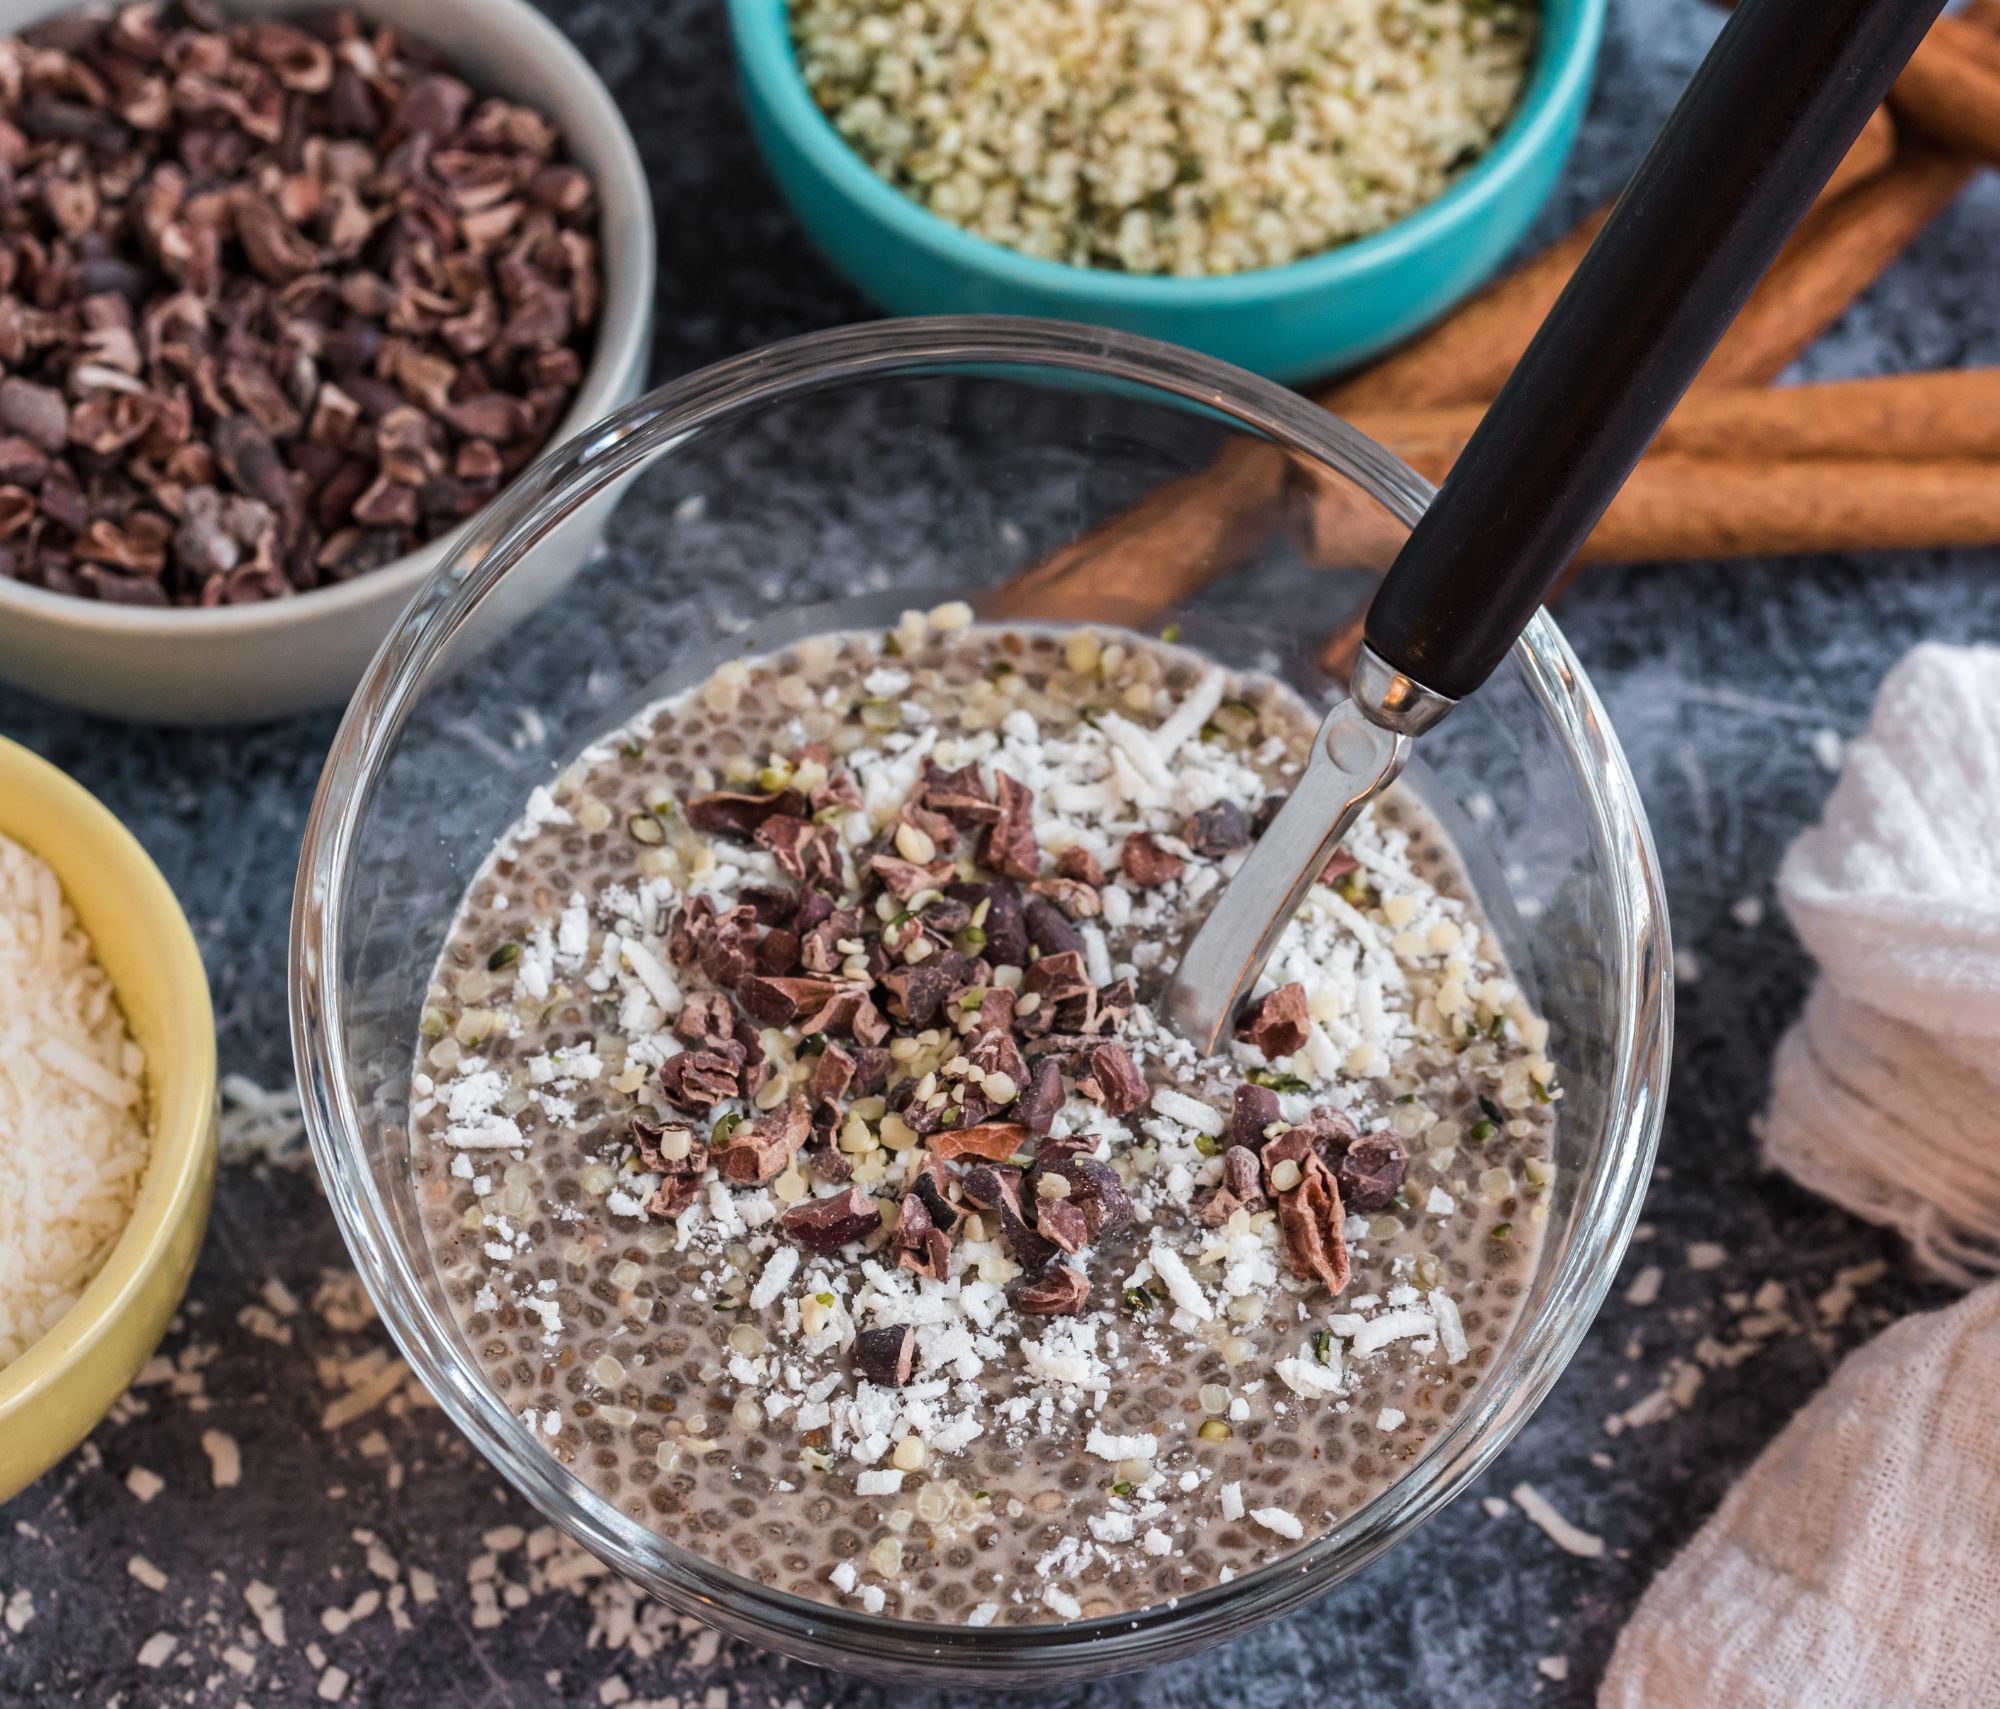 Creamy Vanilla Cinnamon Chia Pudding surrounded by multiple spices and herbs